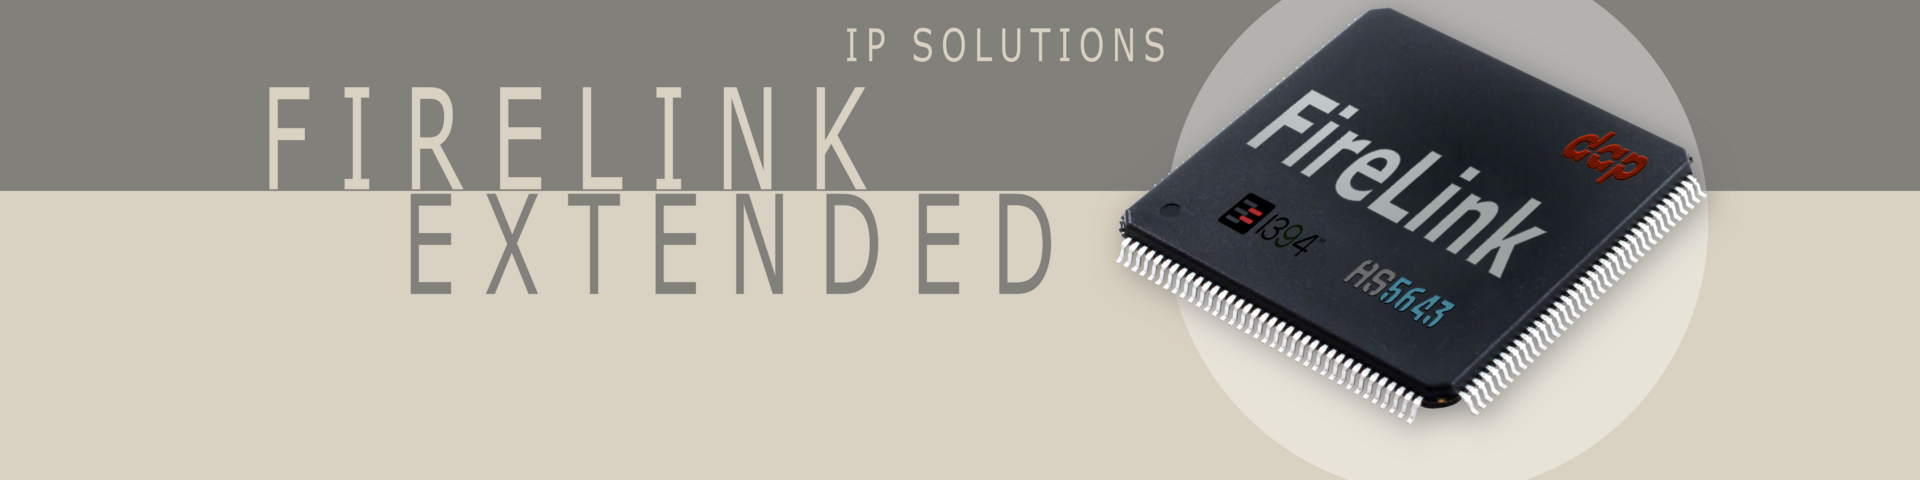 1394 and AS5643 IP Core solutions - FireLink Extended